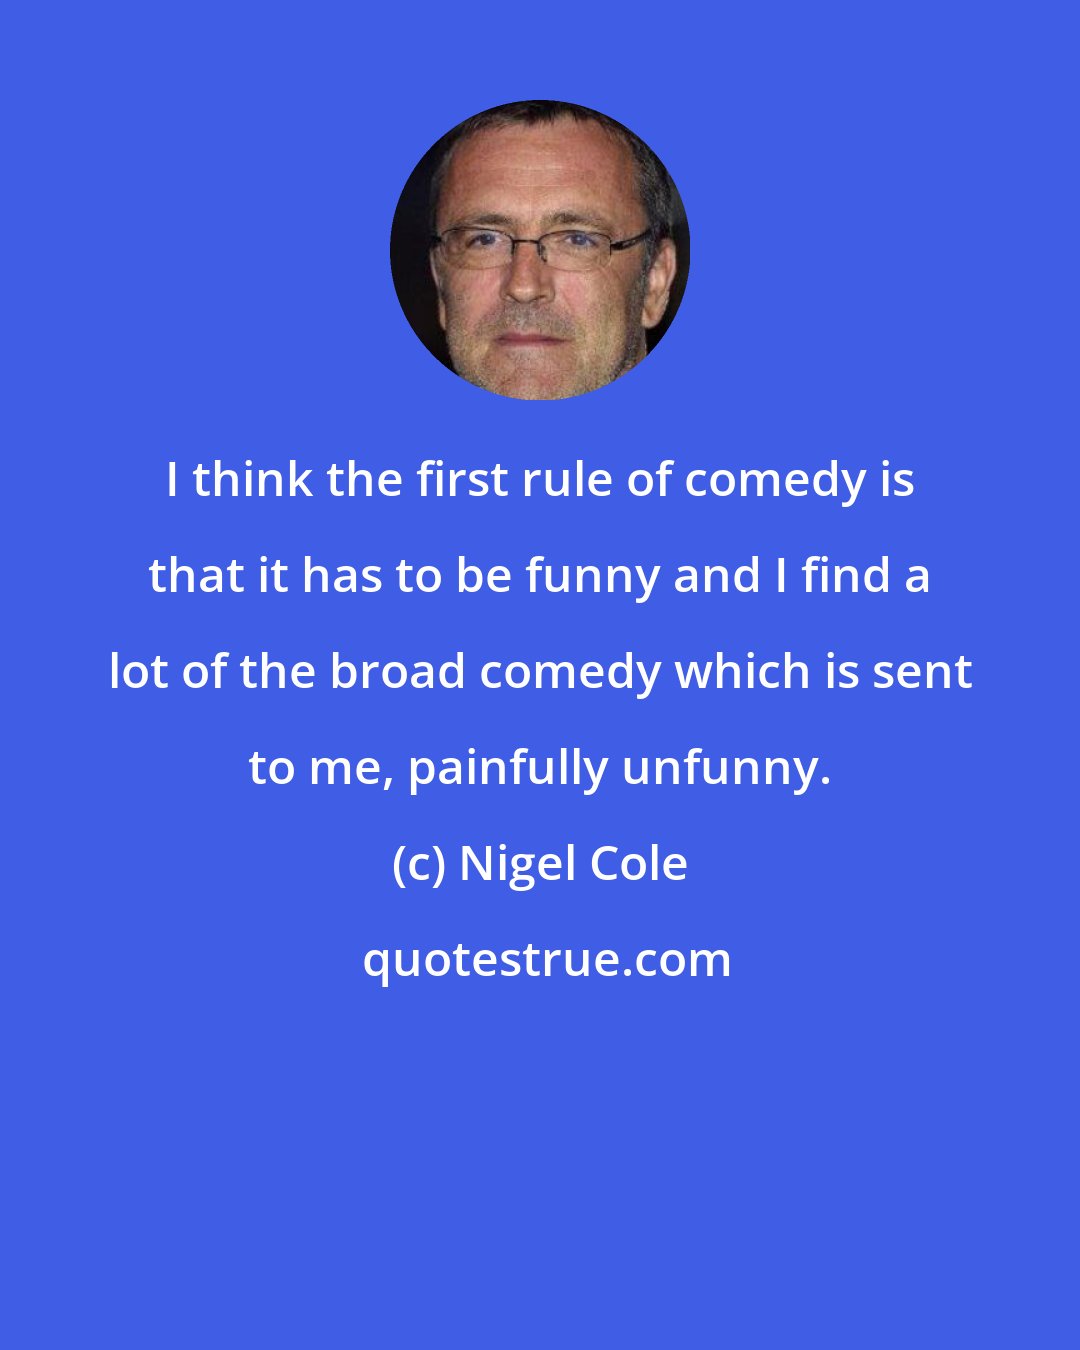 Nigel Cole: I think the first rule of comedy is that it has to be funny and I find a lot of the broad comedy which is sent to me, painfully unfunny.